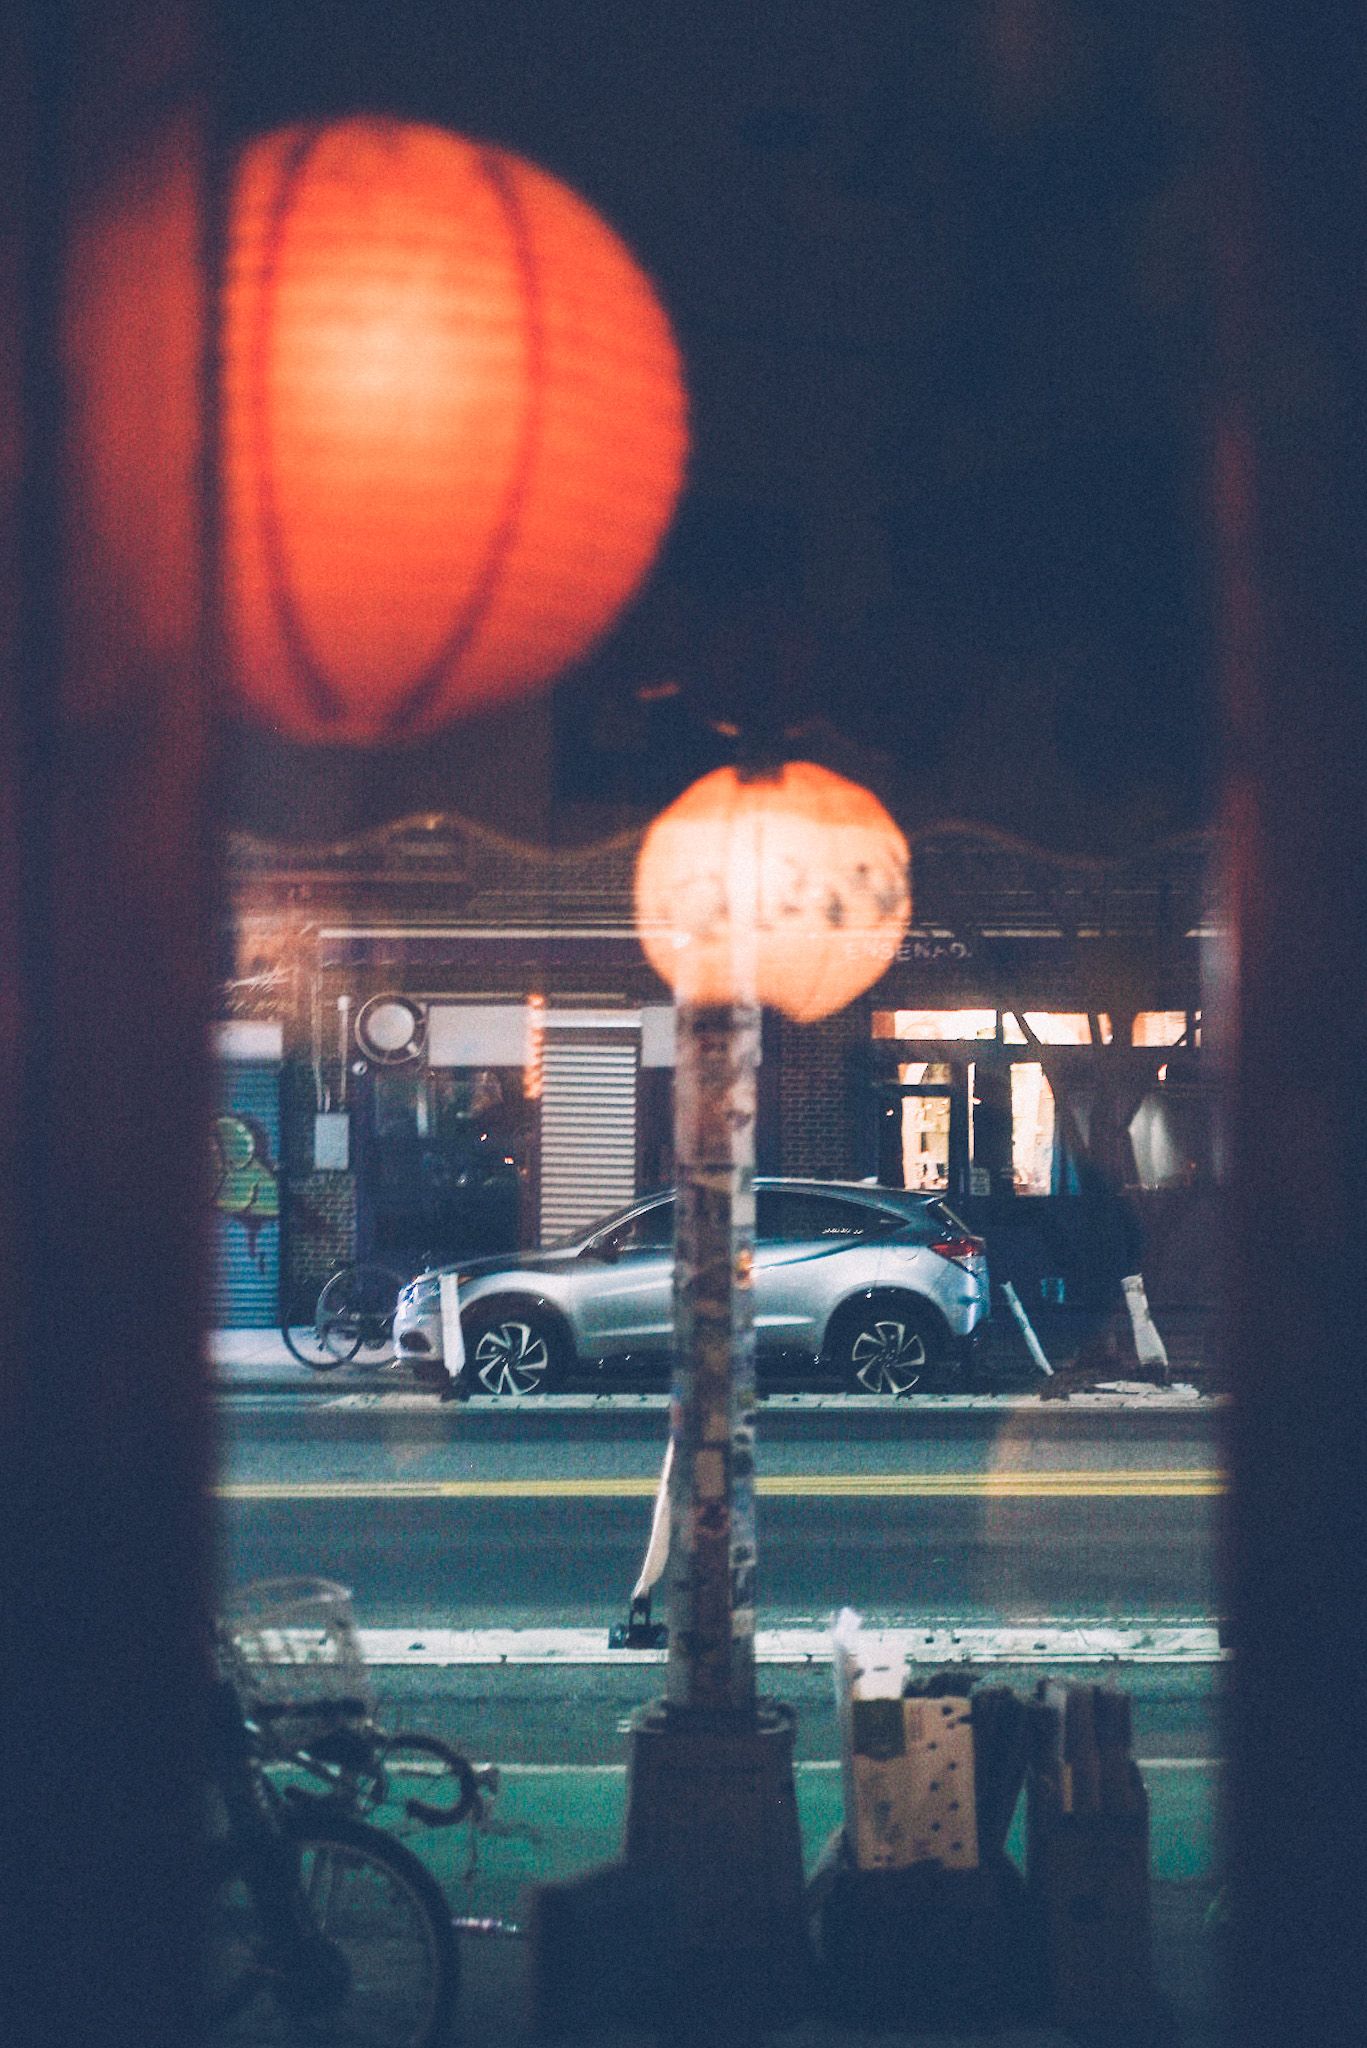 Through a window, the reflection of red paper lanterns is overlaid onto a street scene, bikes and boxes and sticker-covered phone piles and a car and buildings in the background. It is night.